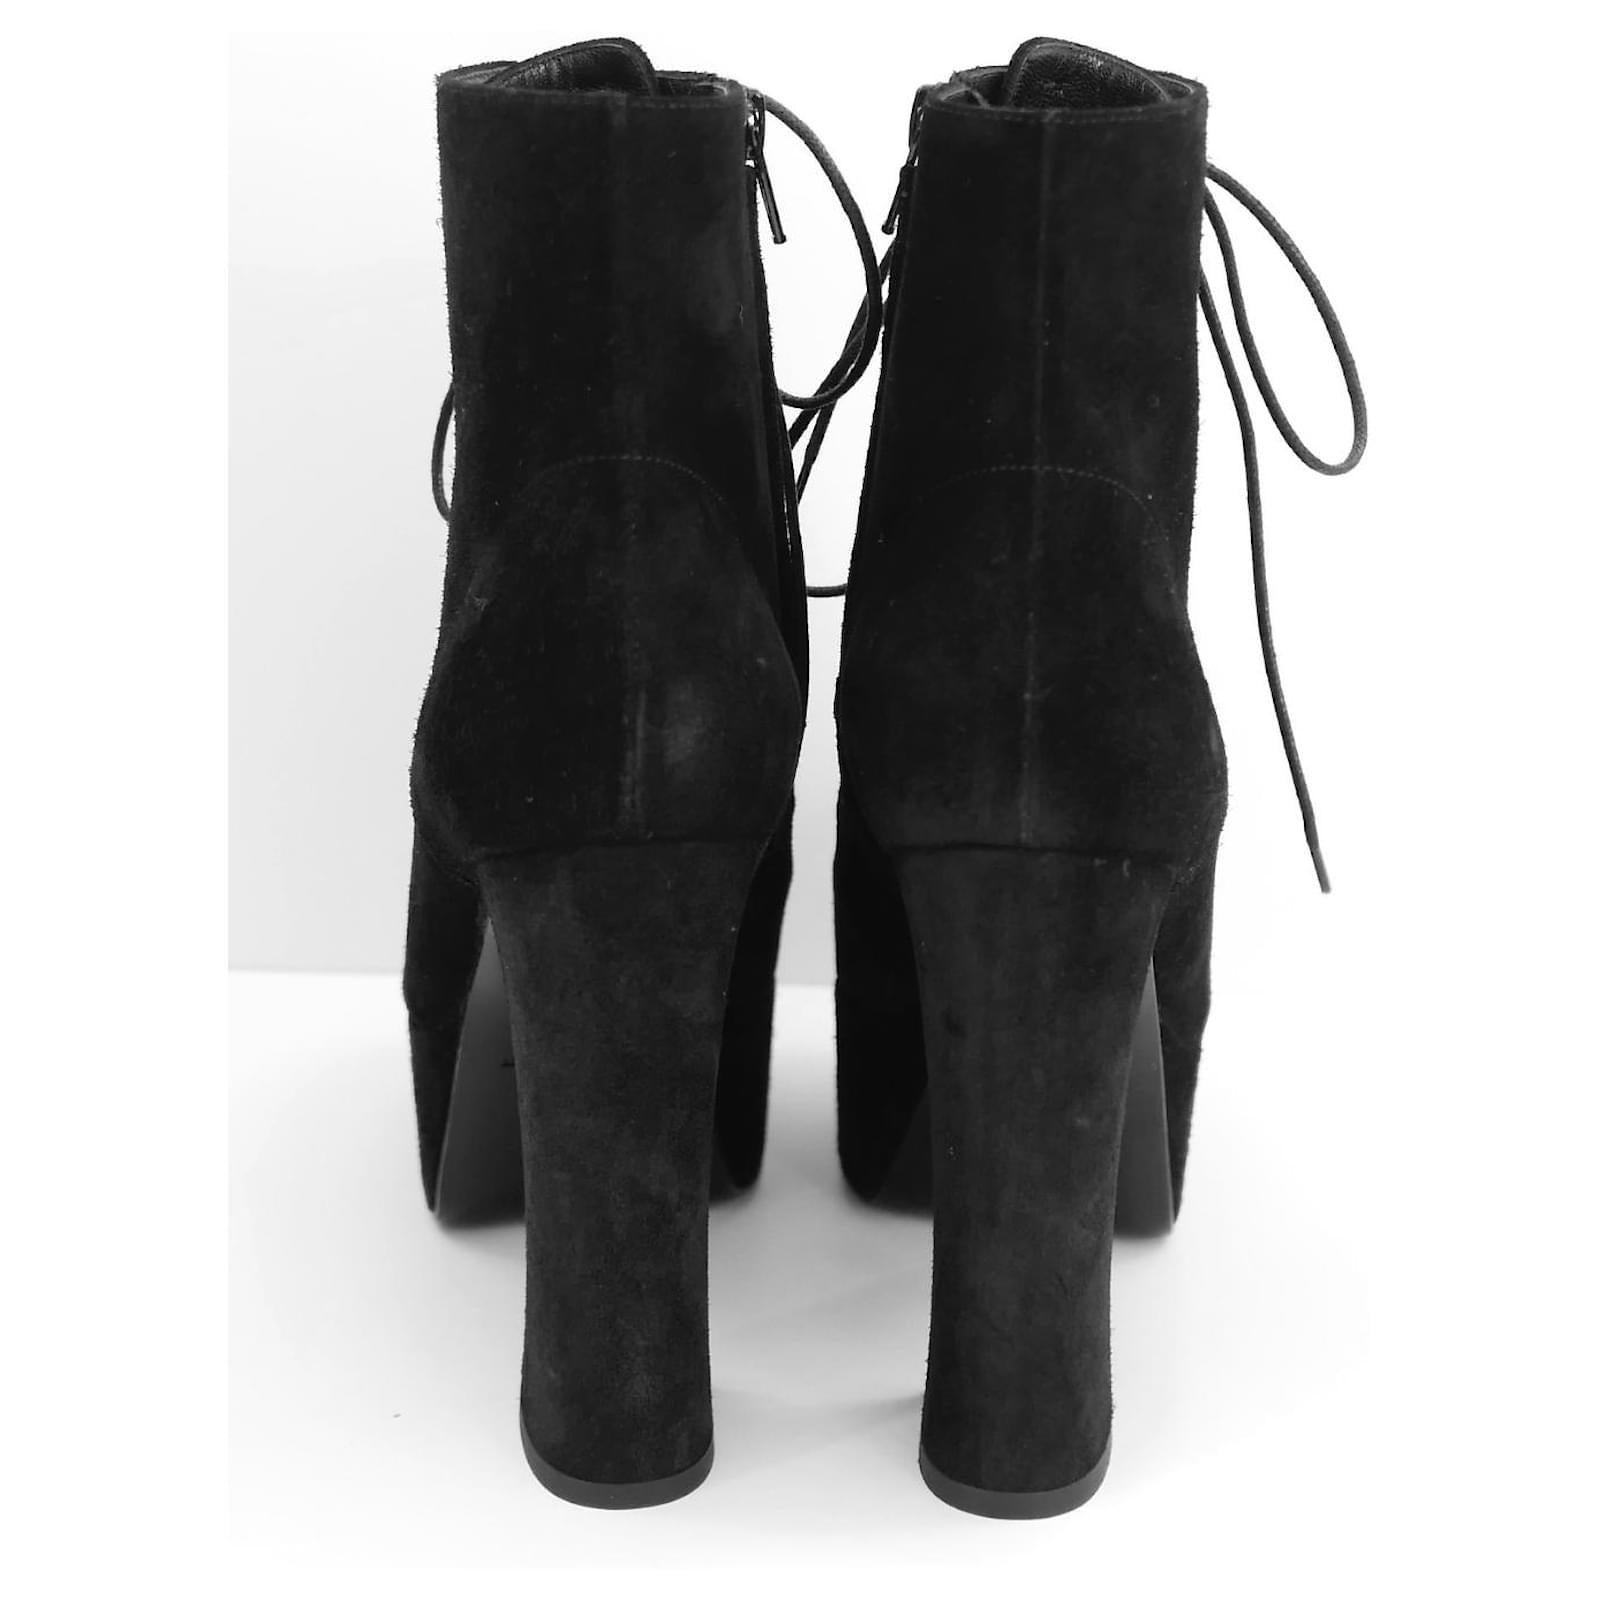 Saint Laurent Candy Platform Ankle Boots In Excellent Condition For Sale In London, GB